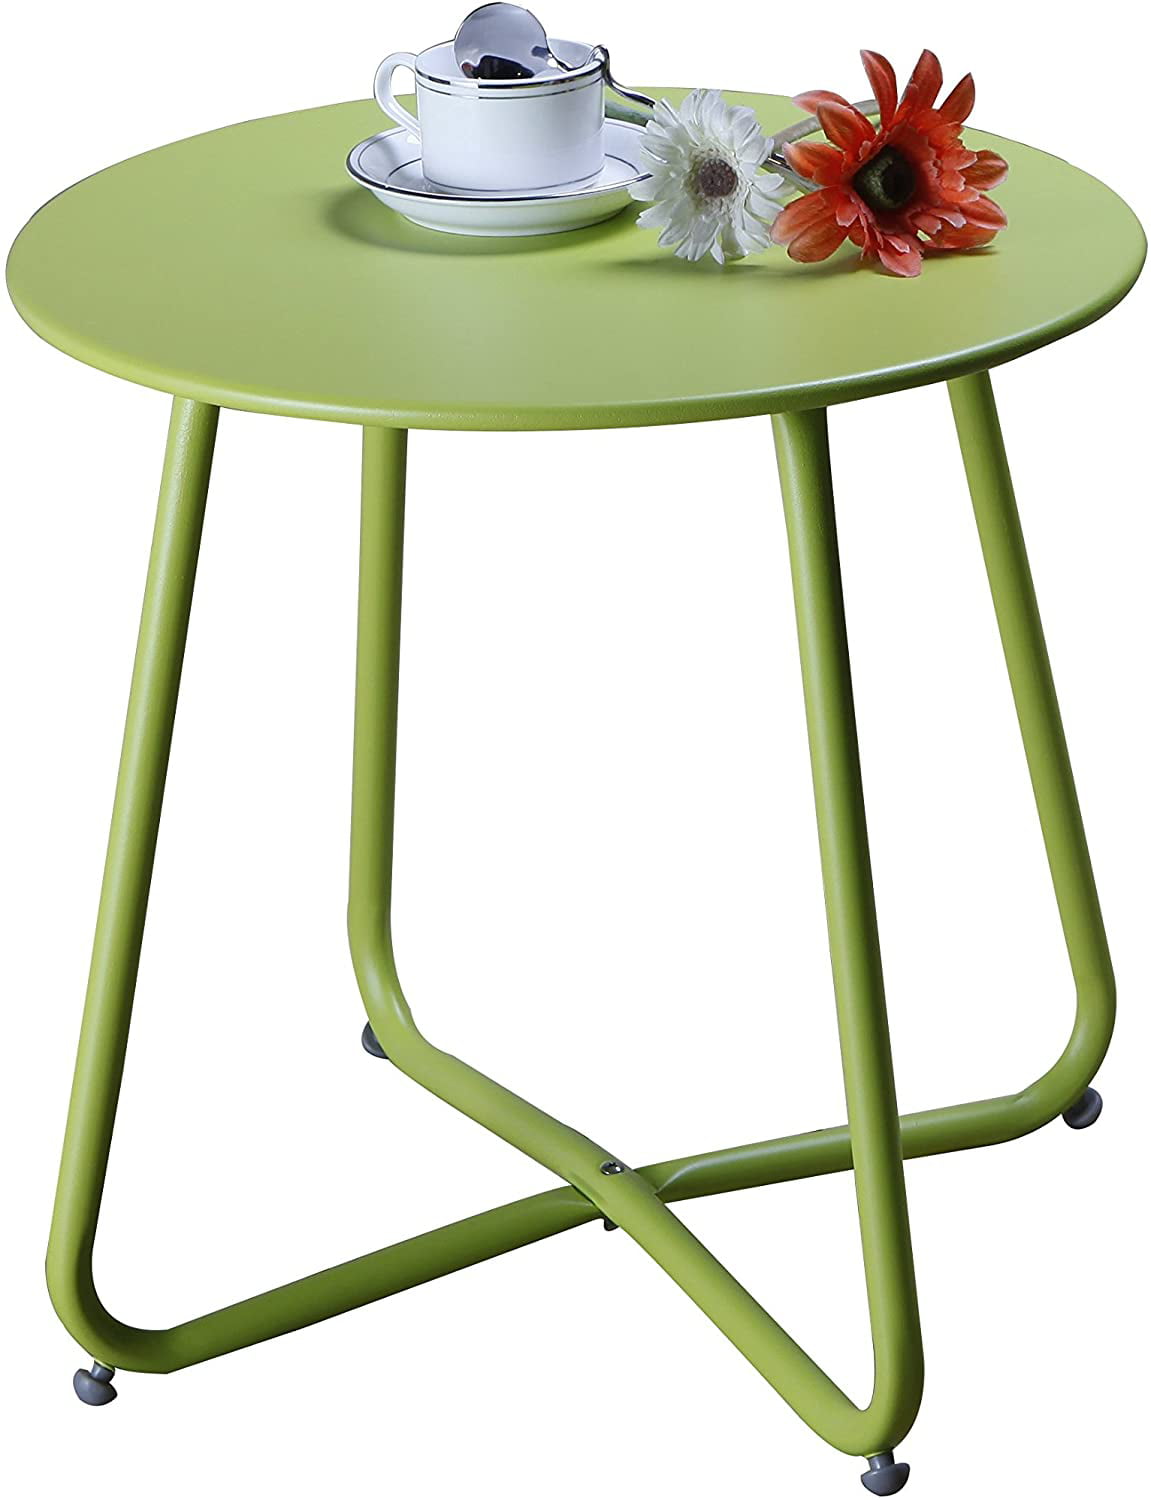 Weather Resistant Outdoor Round End Table Grand Patio Steel Patio Side Table Lime Green 